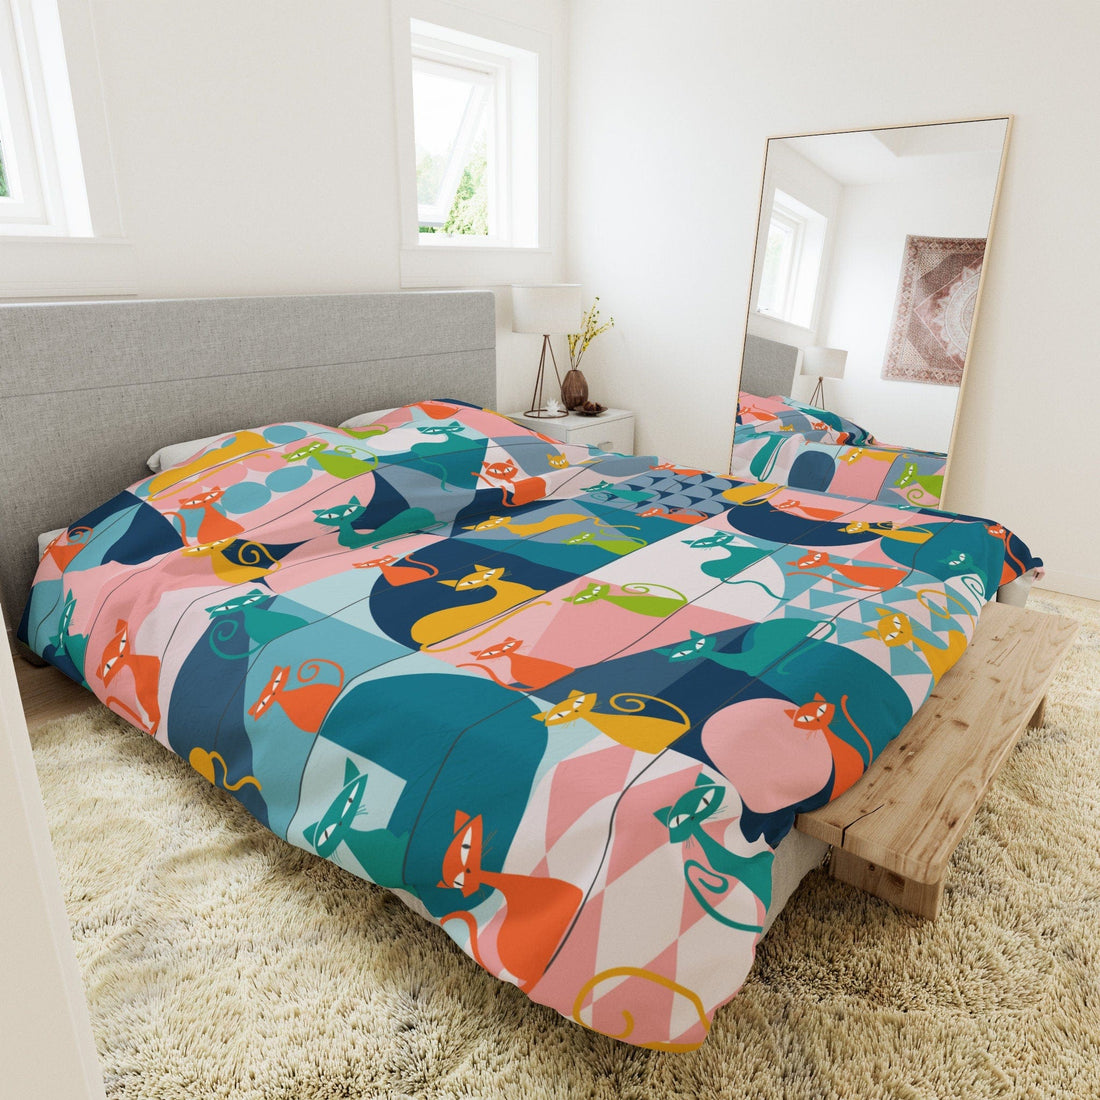 Kate McEnroe New York Mid Century Modern Atomic Cats Duvet Cover, Retro Kitsch Teal, Pink, Orange, Yellow Geometric Bedding, Queen, King, Twin, Twin XL SizesDuvet Covers50113044596668280108